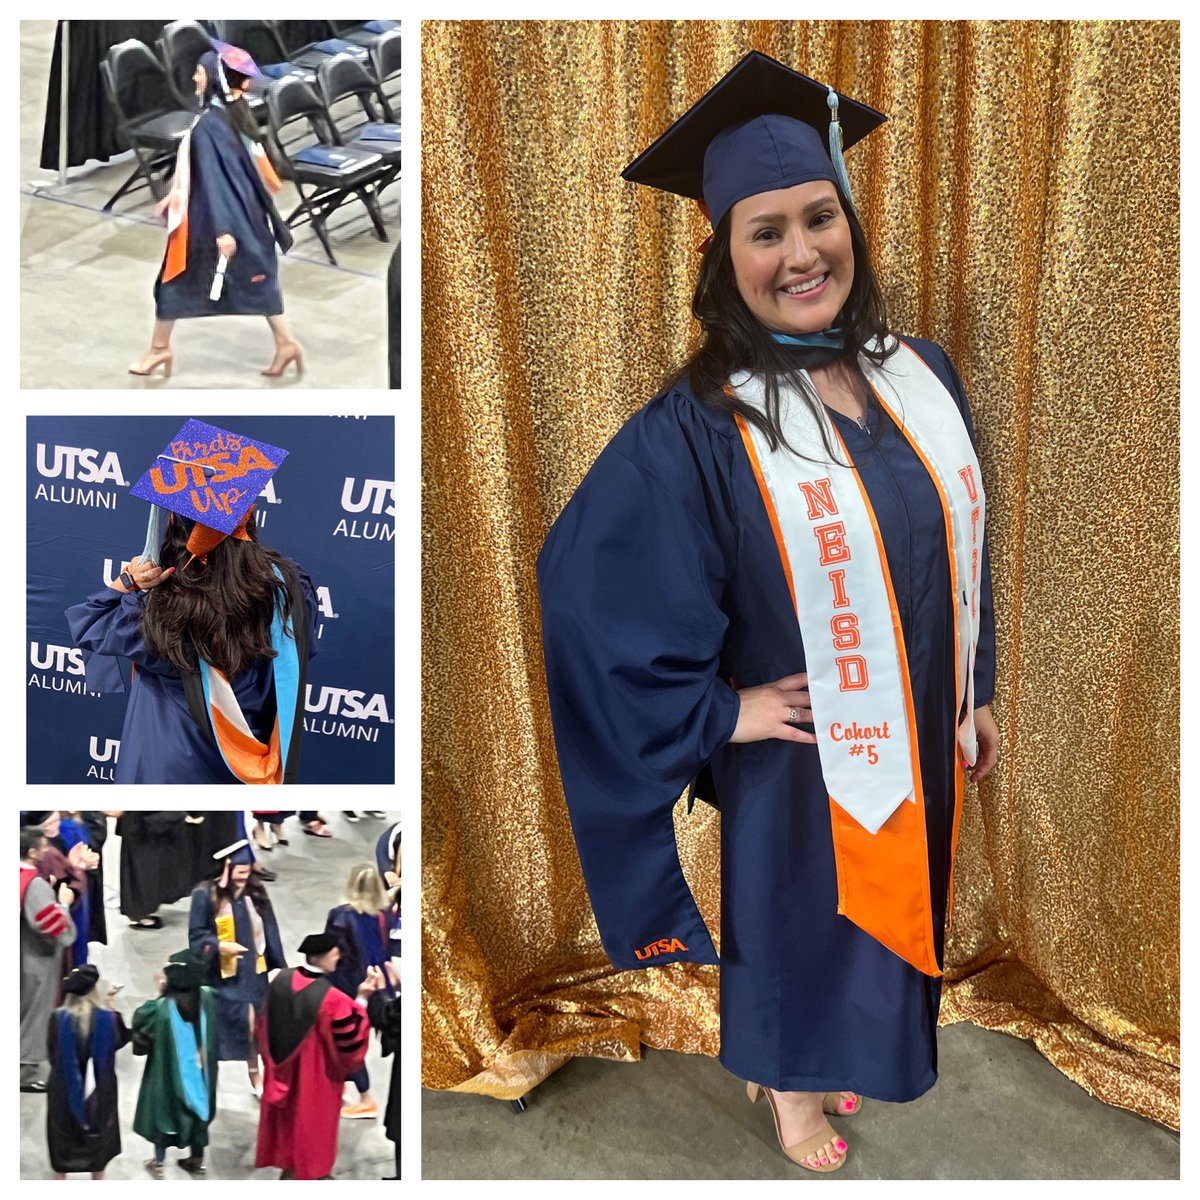 A year ago the 13 of us choose the UTSA NEISD Cohort to build us into leaders. Today we proudly graduate as a team ready to show our passion for education as future instructional leaders. @edlawethics @NEISD_rudyj @NEISD #theneisdway #UTSAGrad23